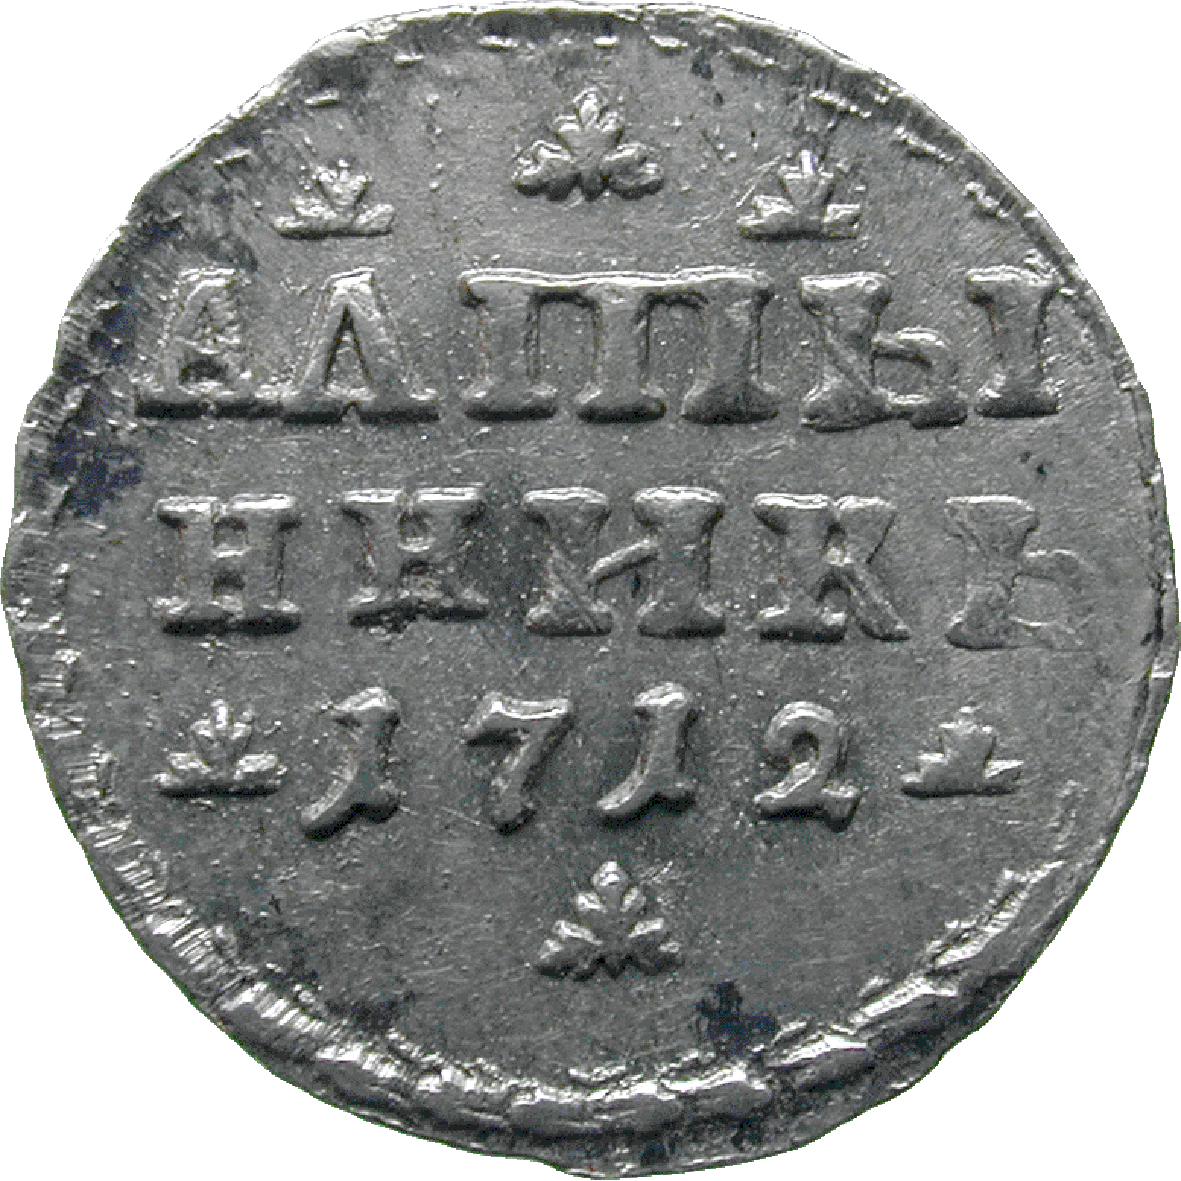 Russian Empire, Peter I the Great, Altyn 1712 (reverse)